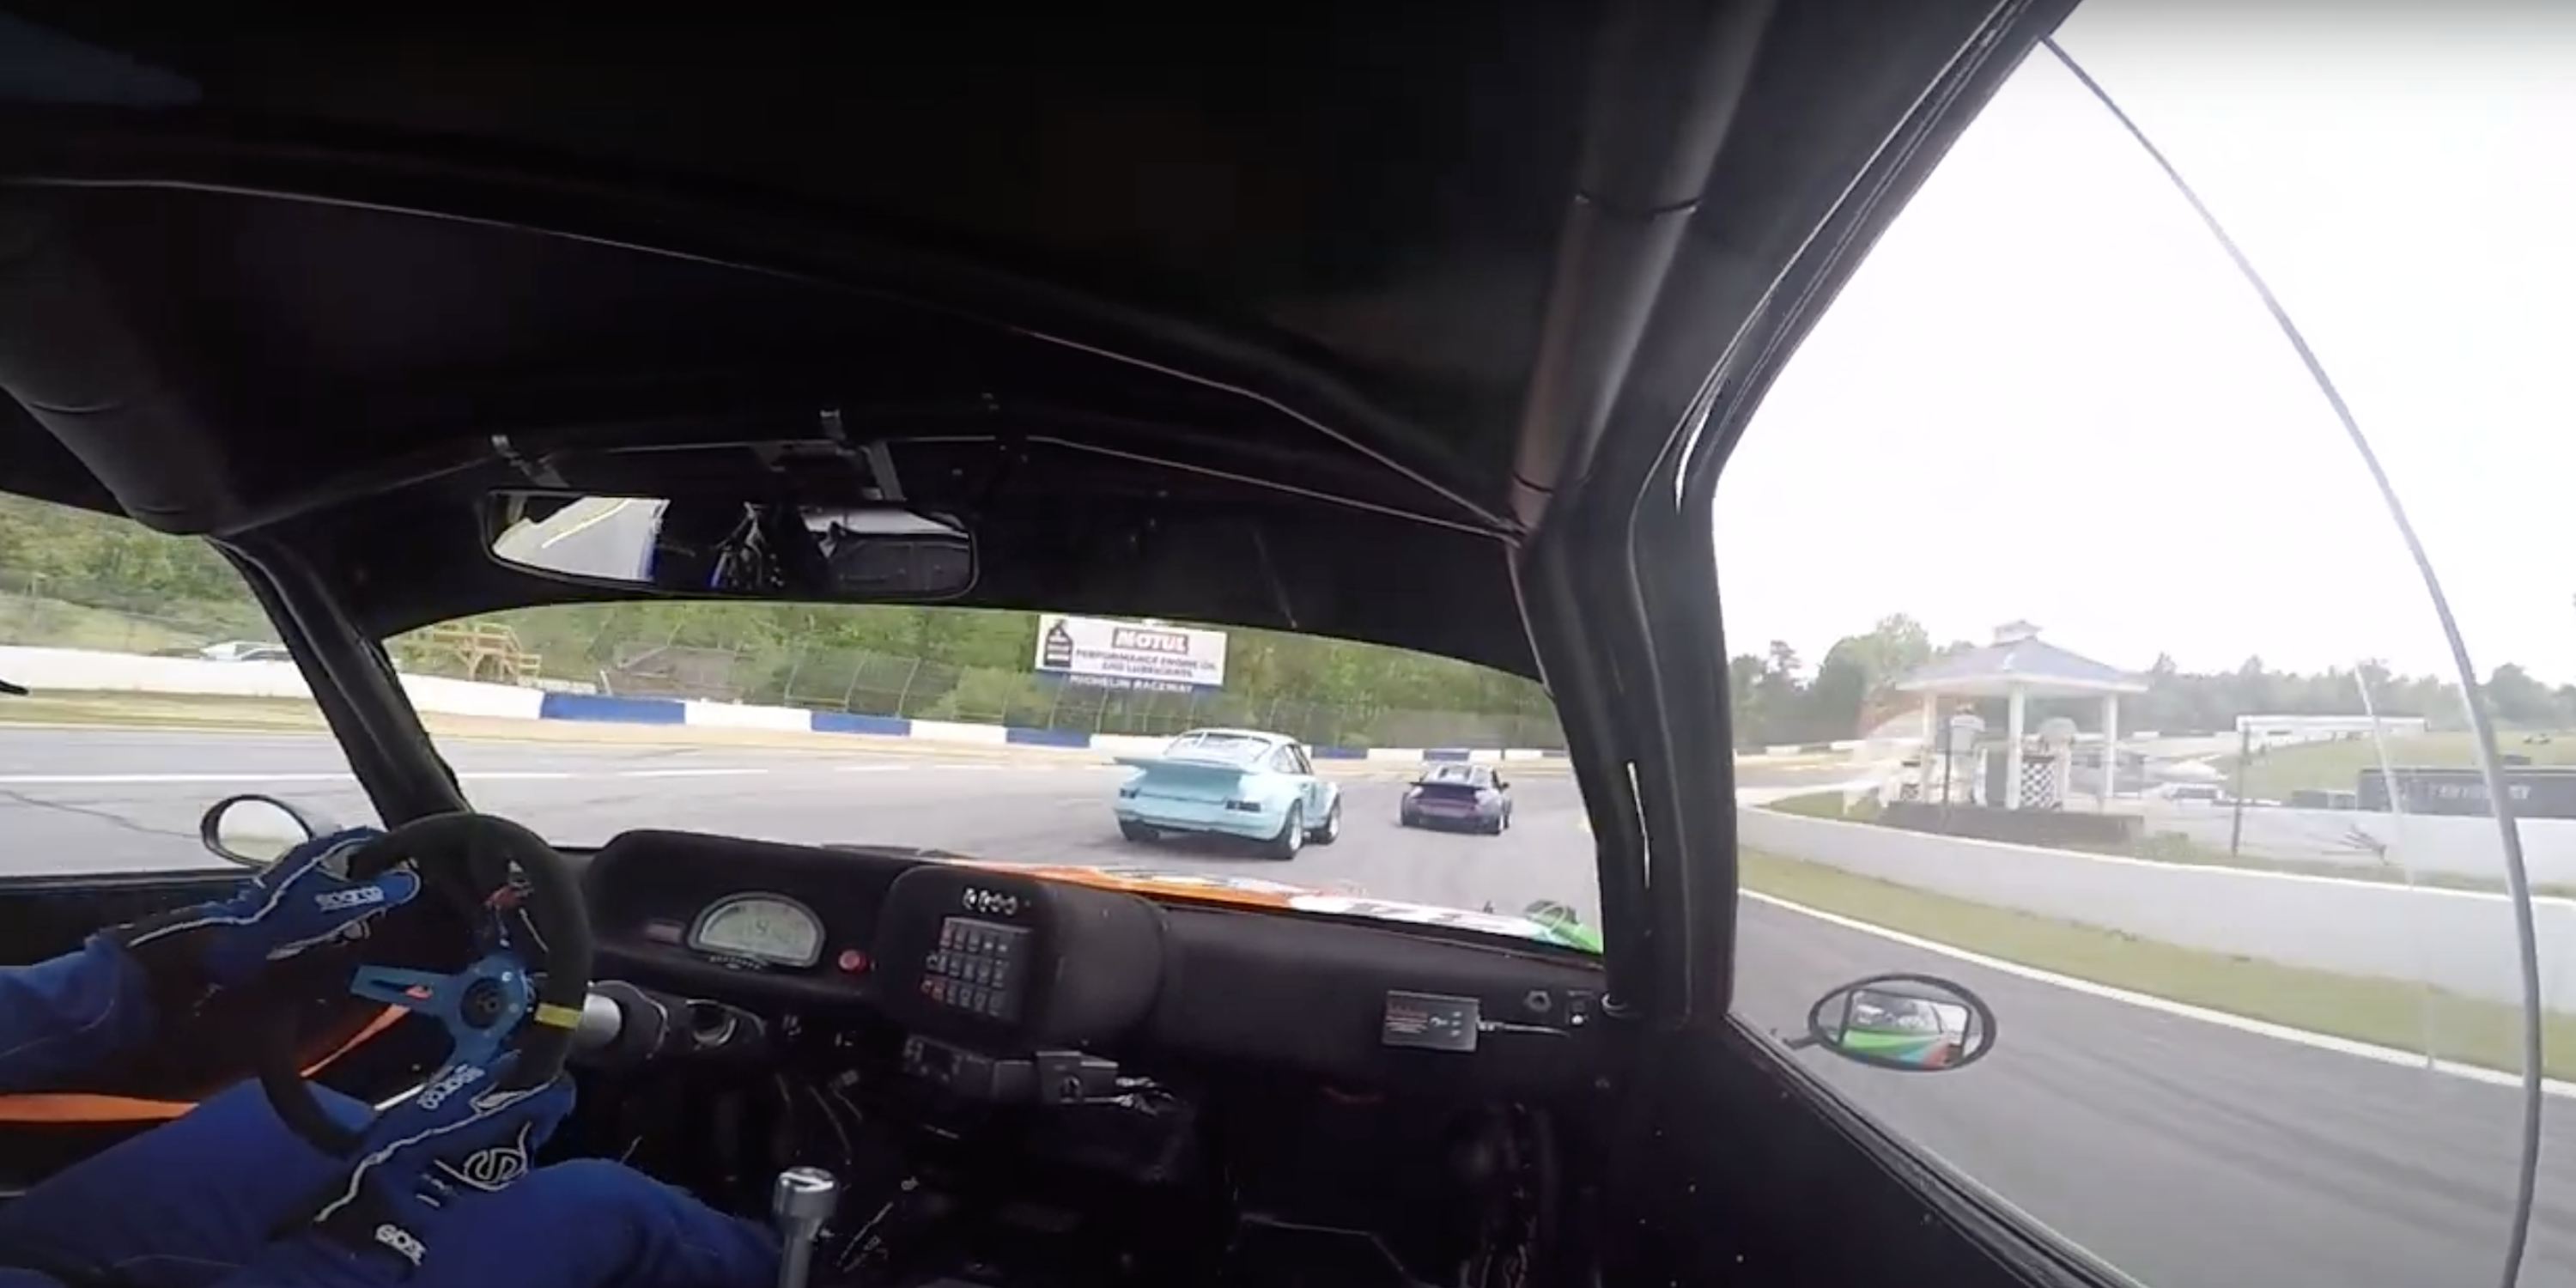 Watch and Listen to This BMW CSL 3.5 as it Battles Vintage Porsche RSRs on Track